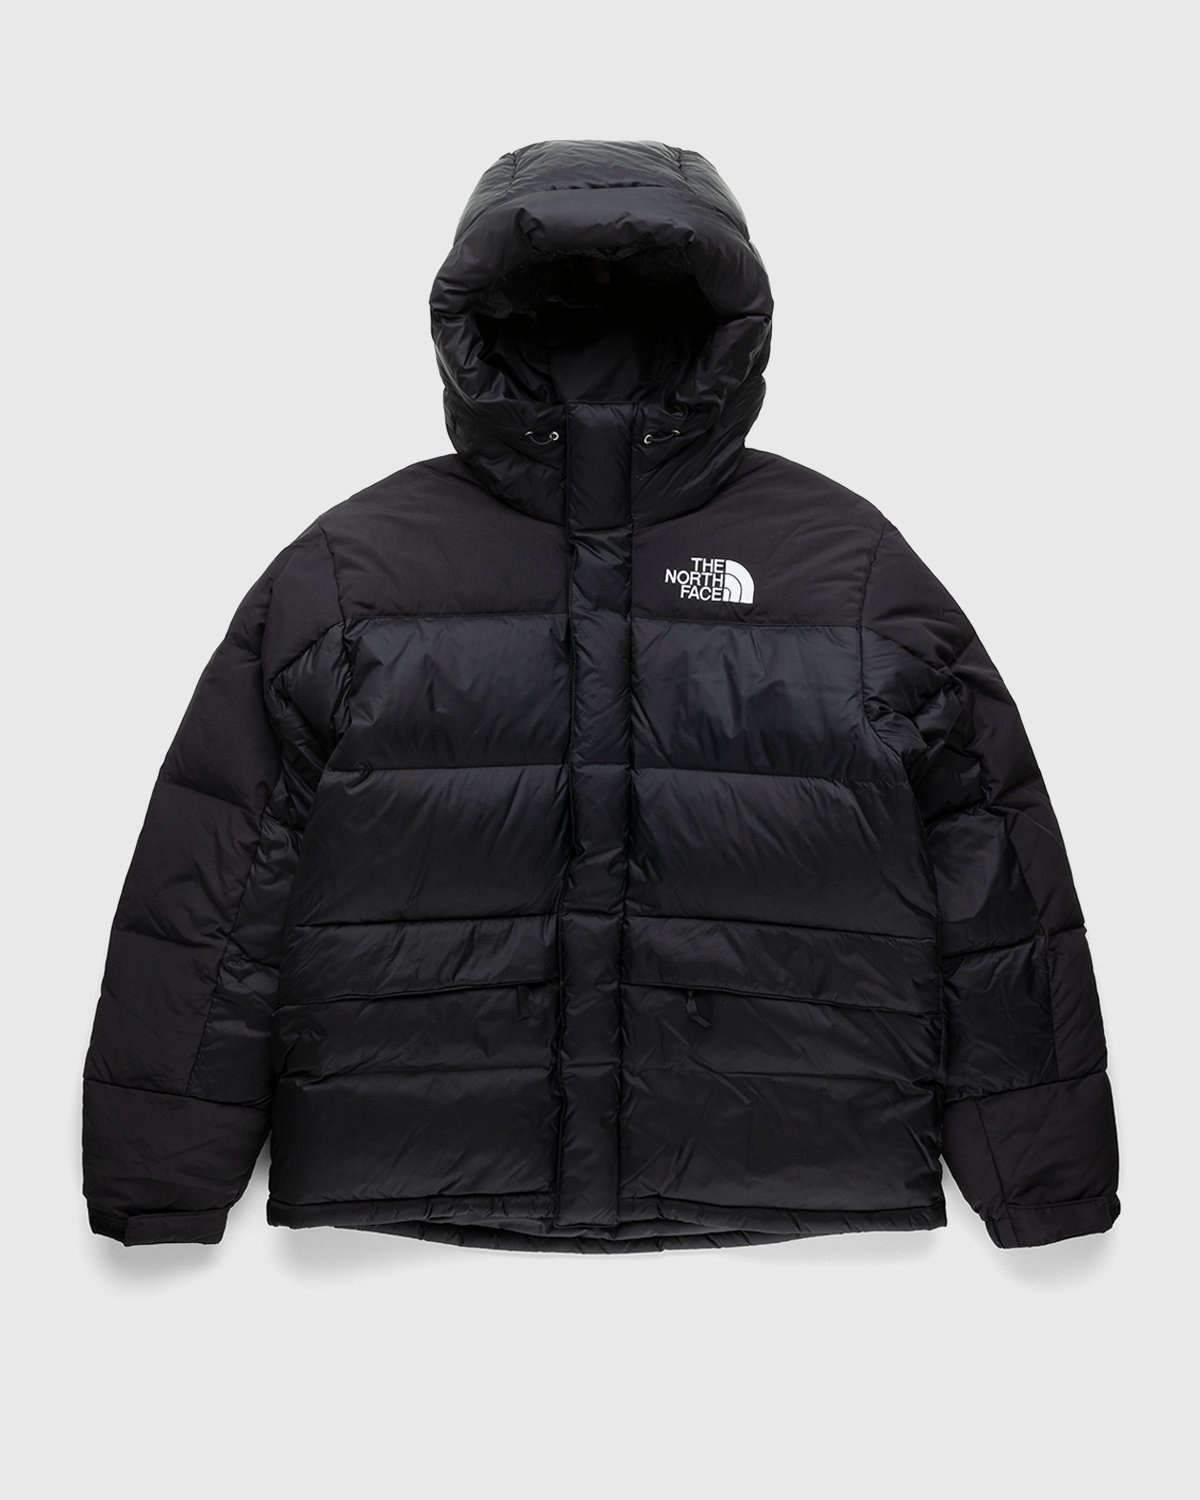 The North Face – Himalayan Down Parka Black | Highsnobiety Shop